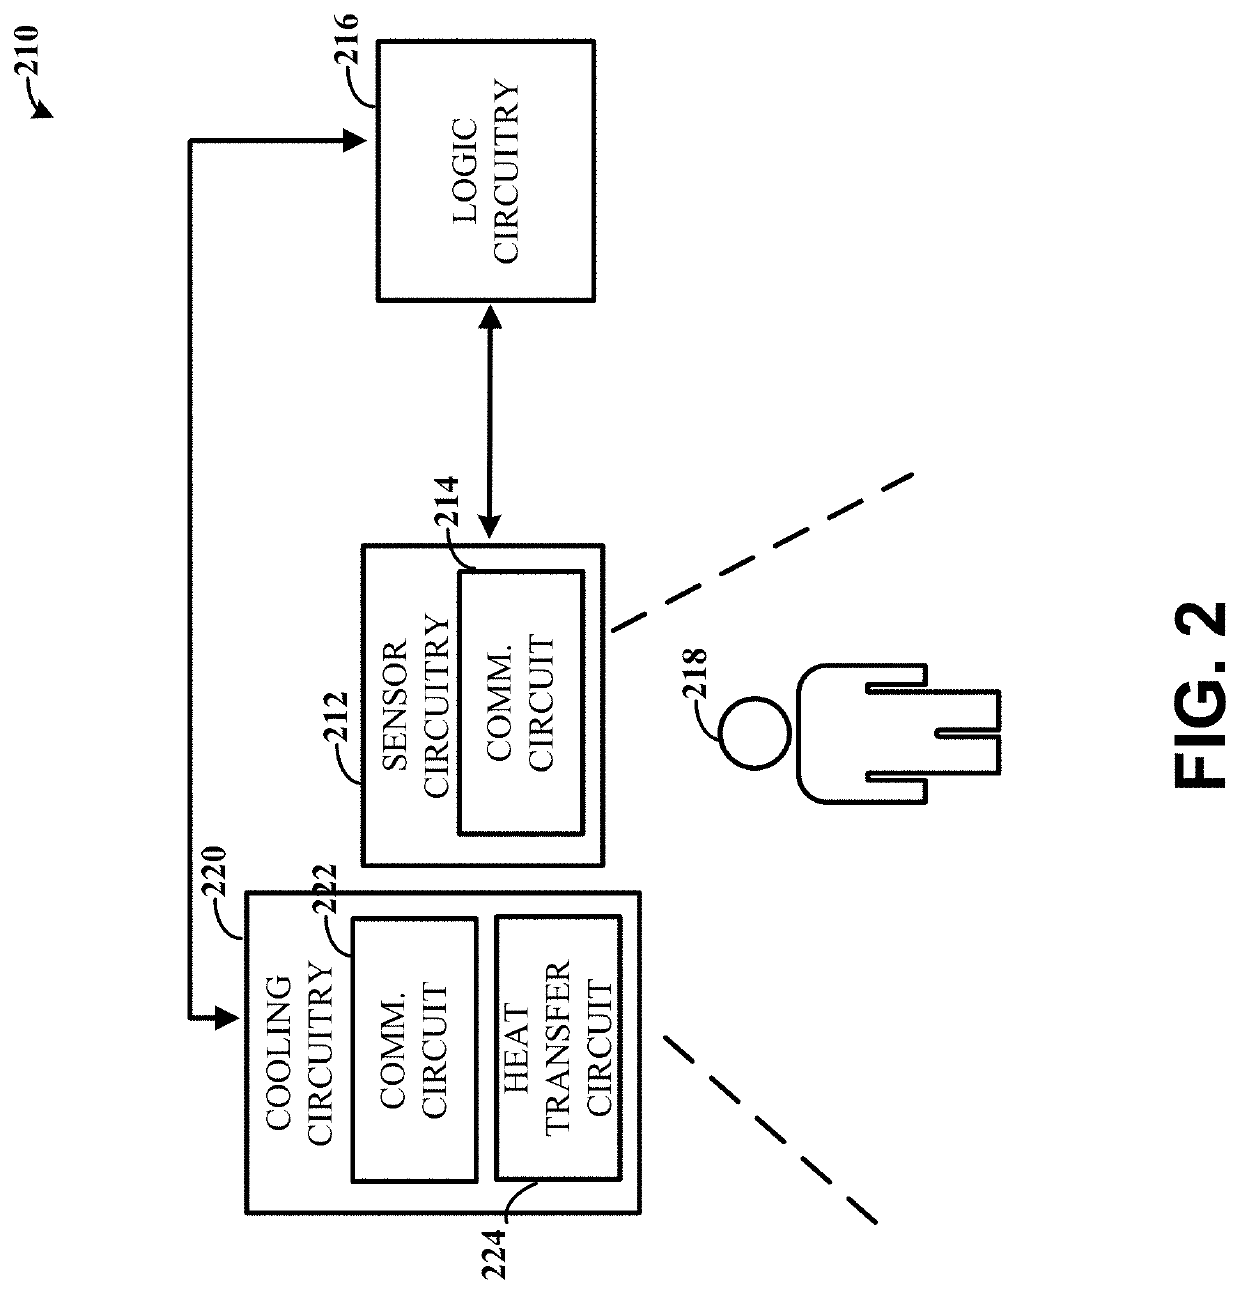 Systems and methods involving predictive modeling of hot flashes